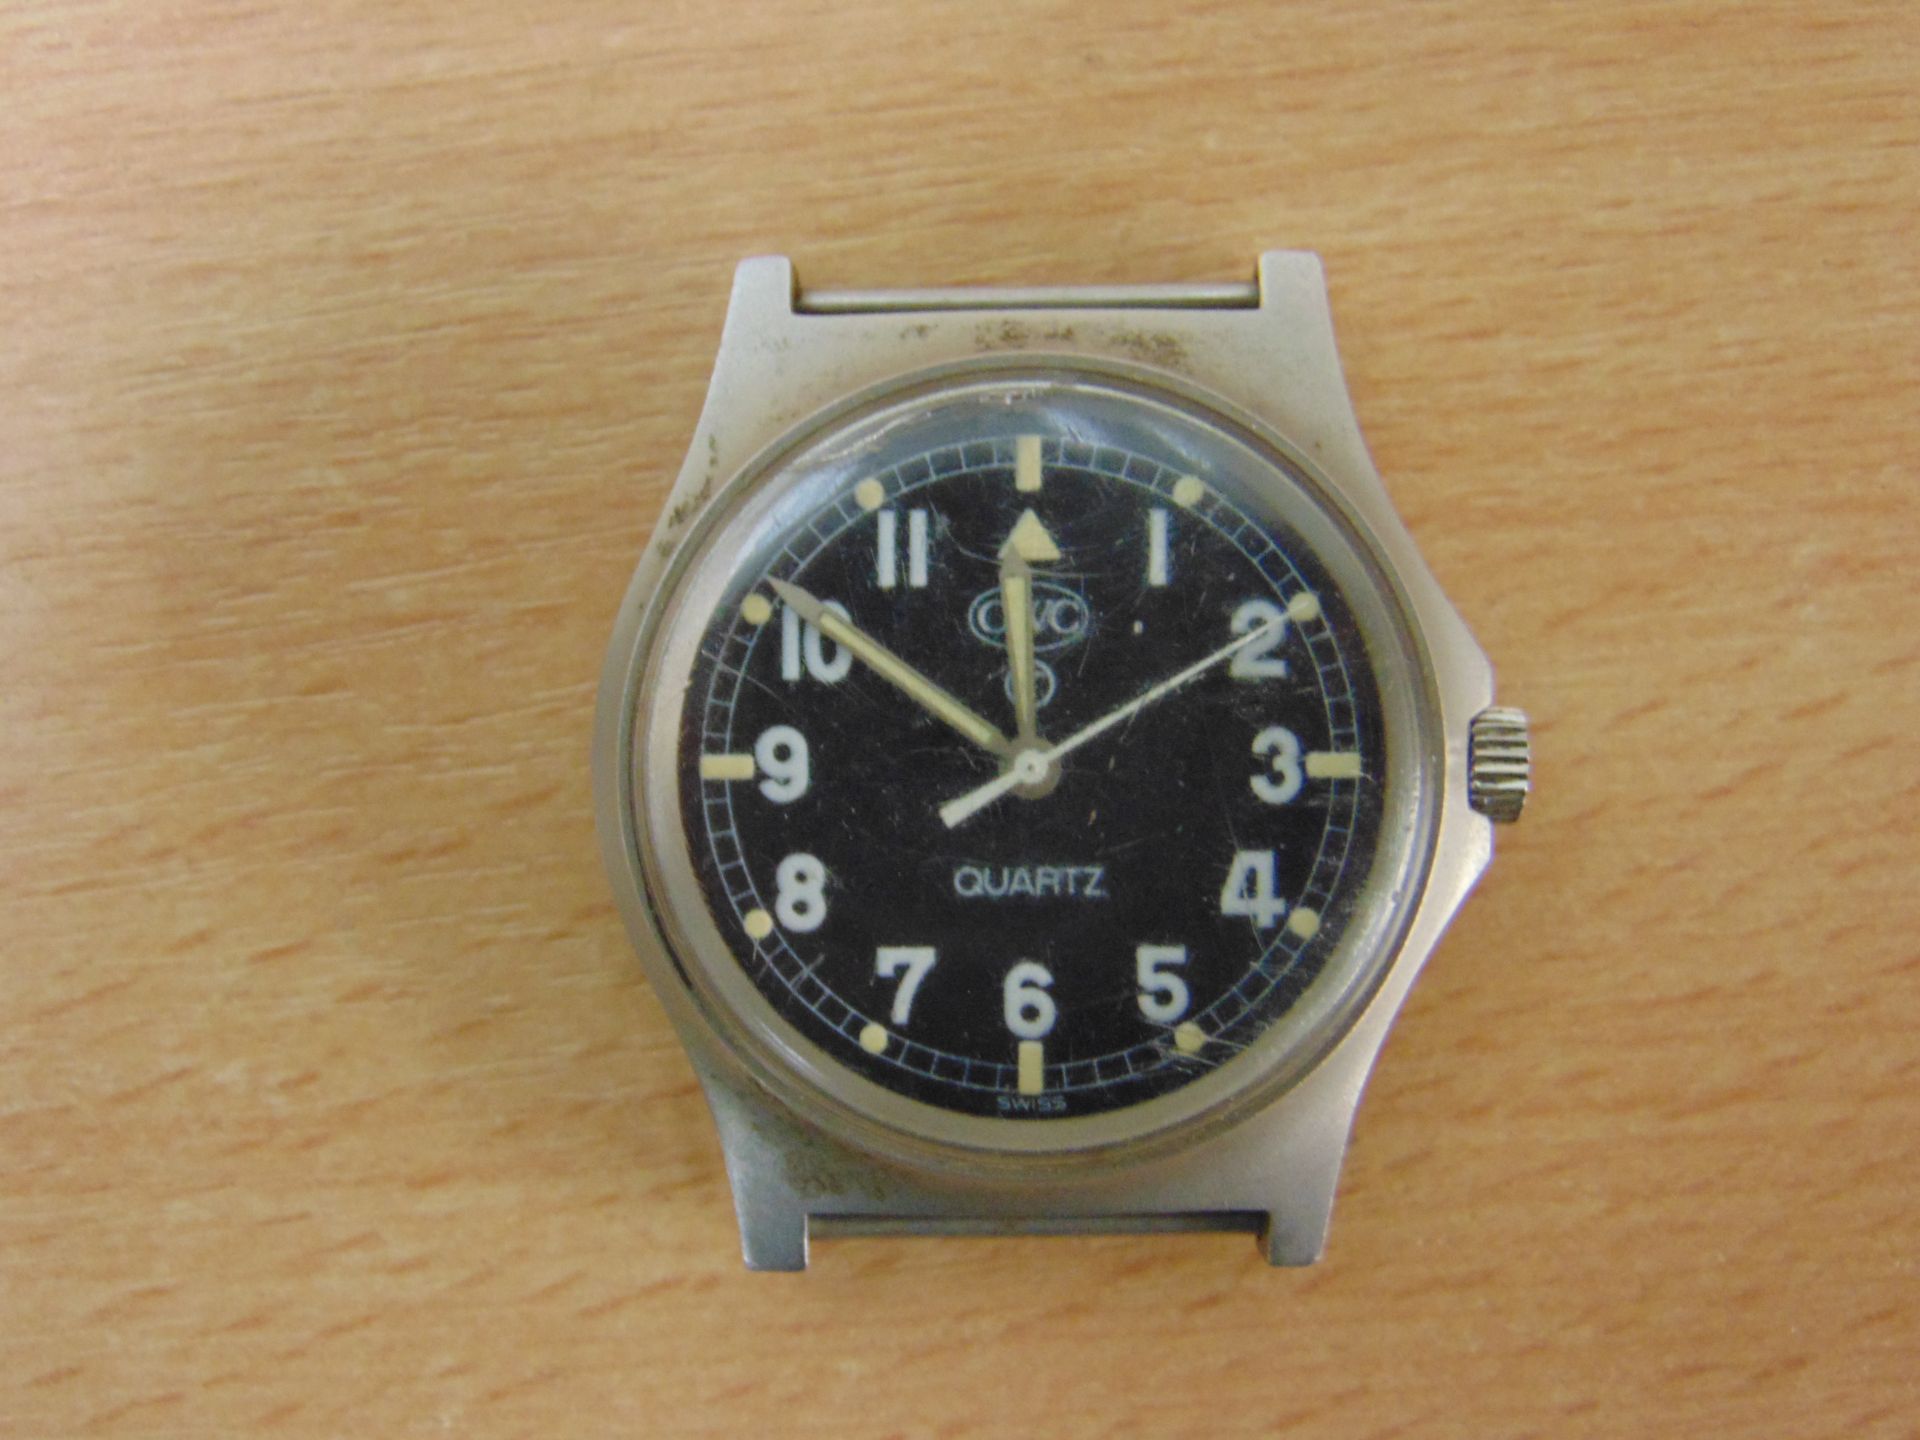 CWC W10 FAT BOY SERVICE WATCH DATED 1983 - Image 3 of 6